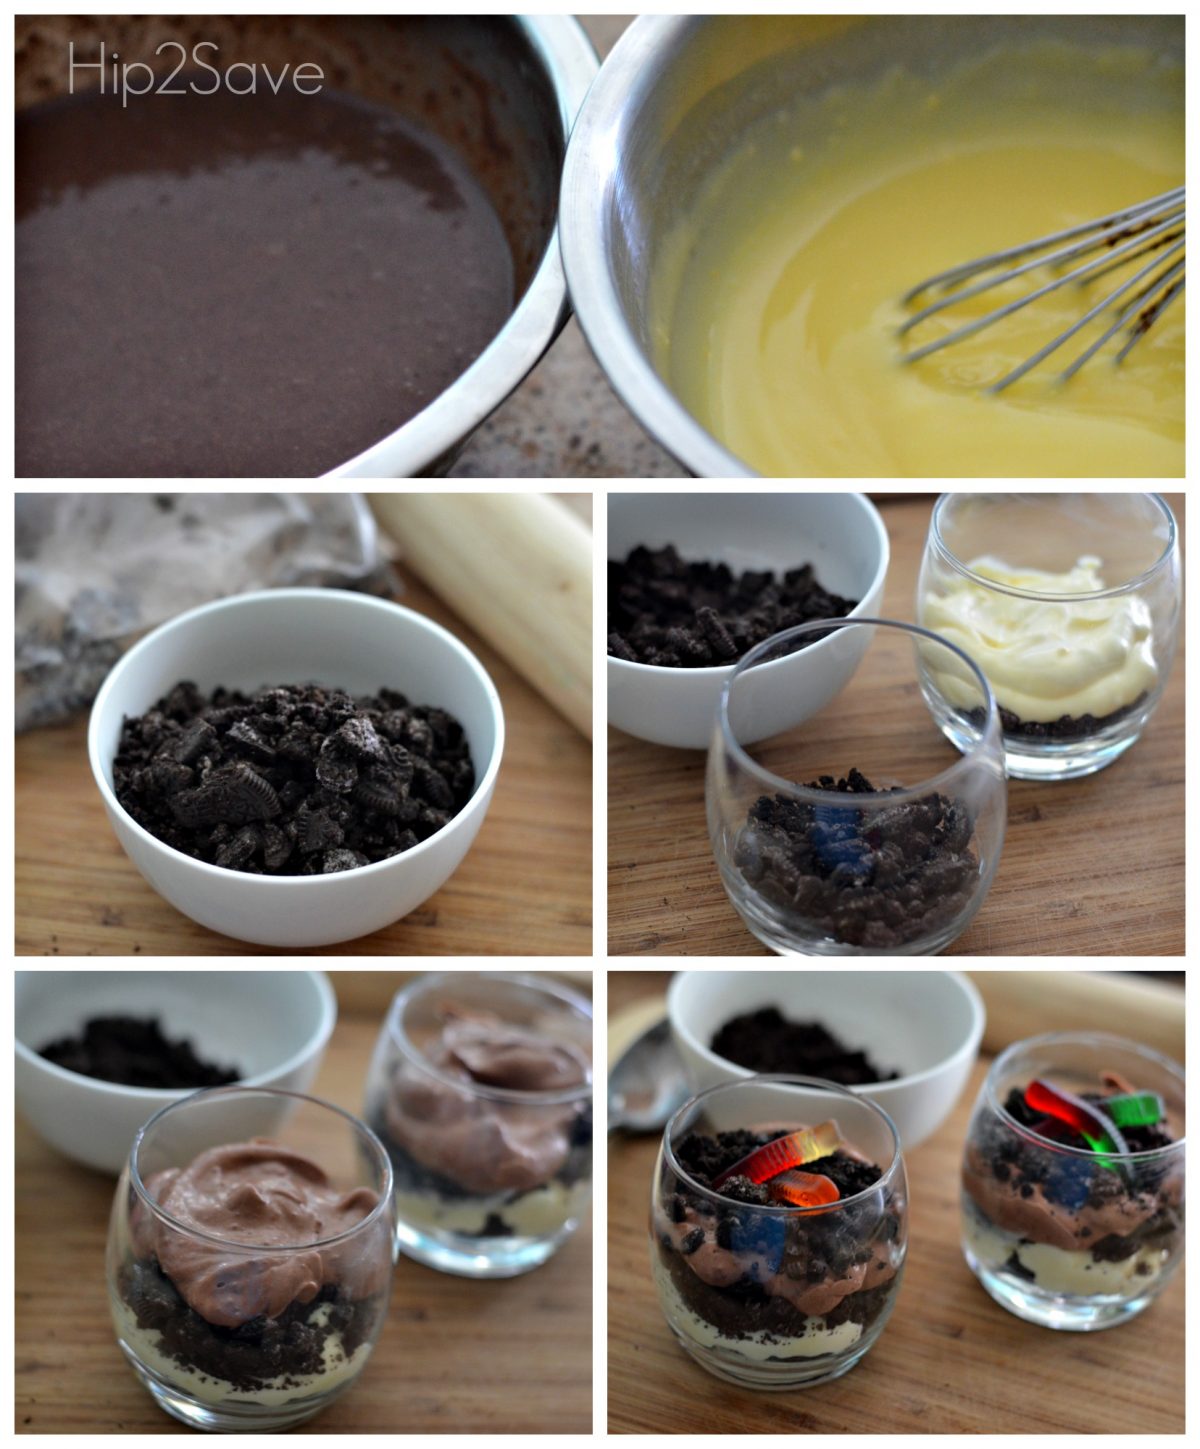 Oreo & Pudding Dirt Cups how to make step by step process